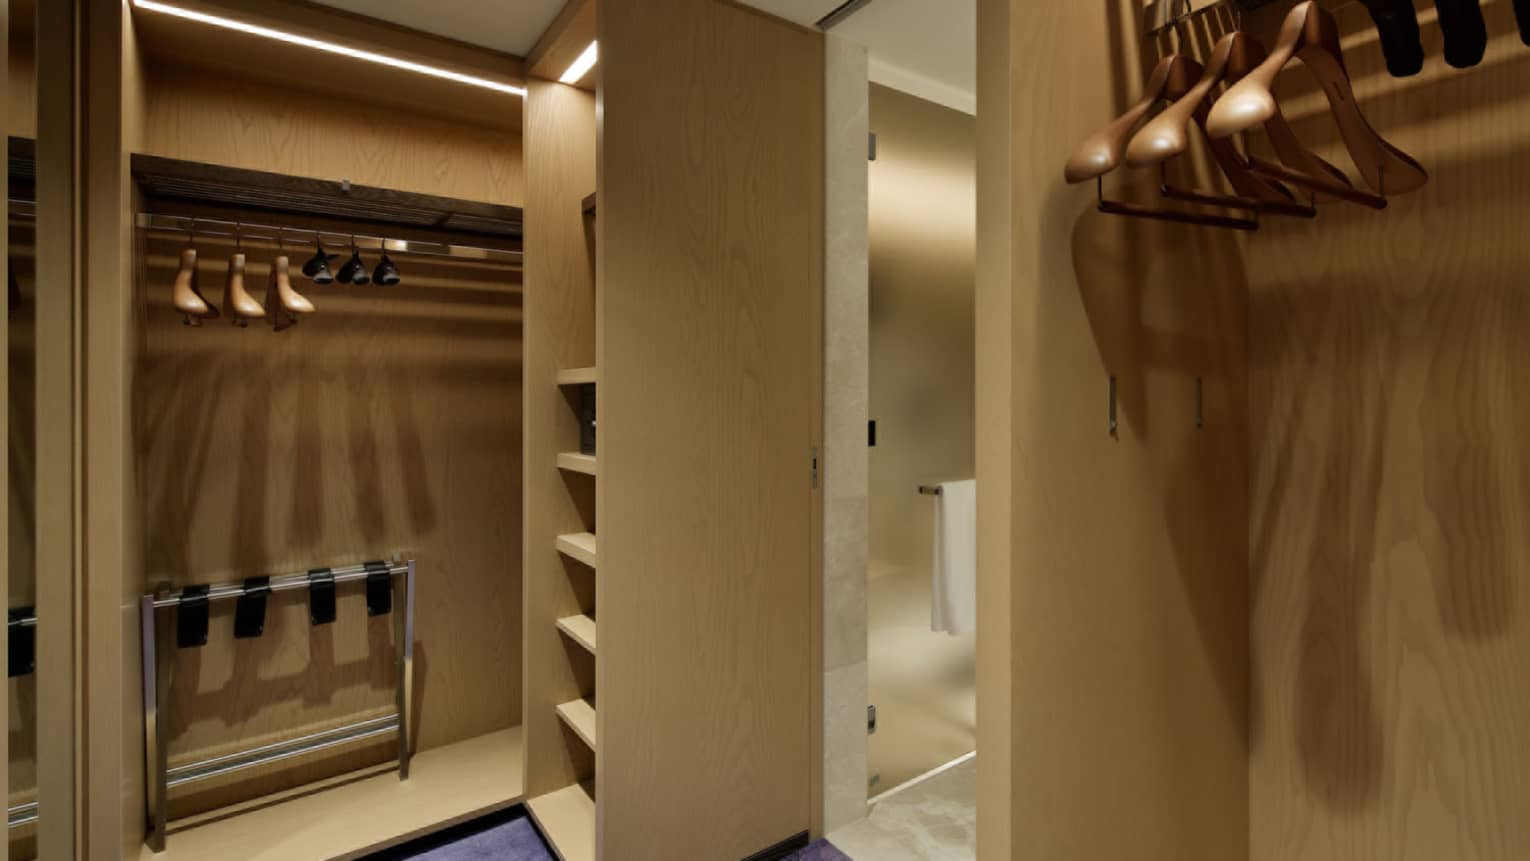 Walk-in closet with wooden shelves and purple carpeting